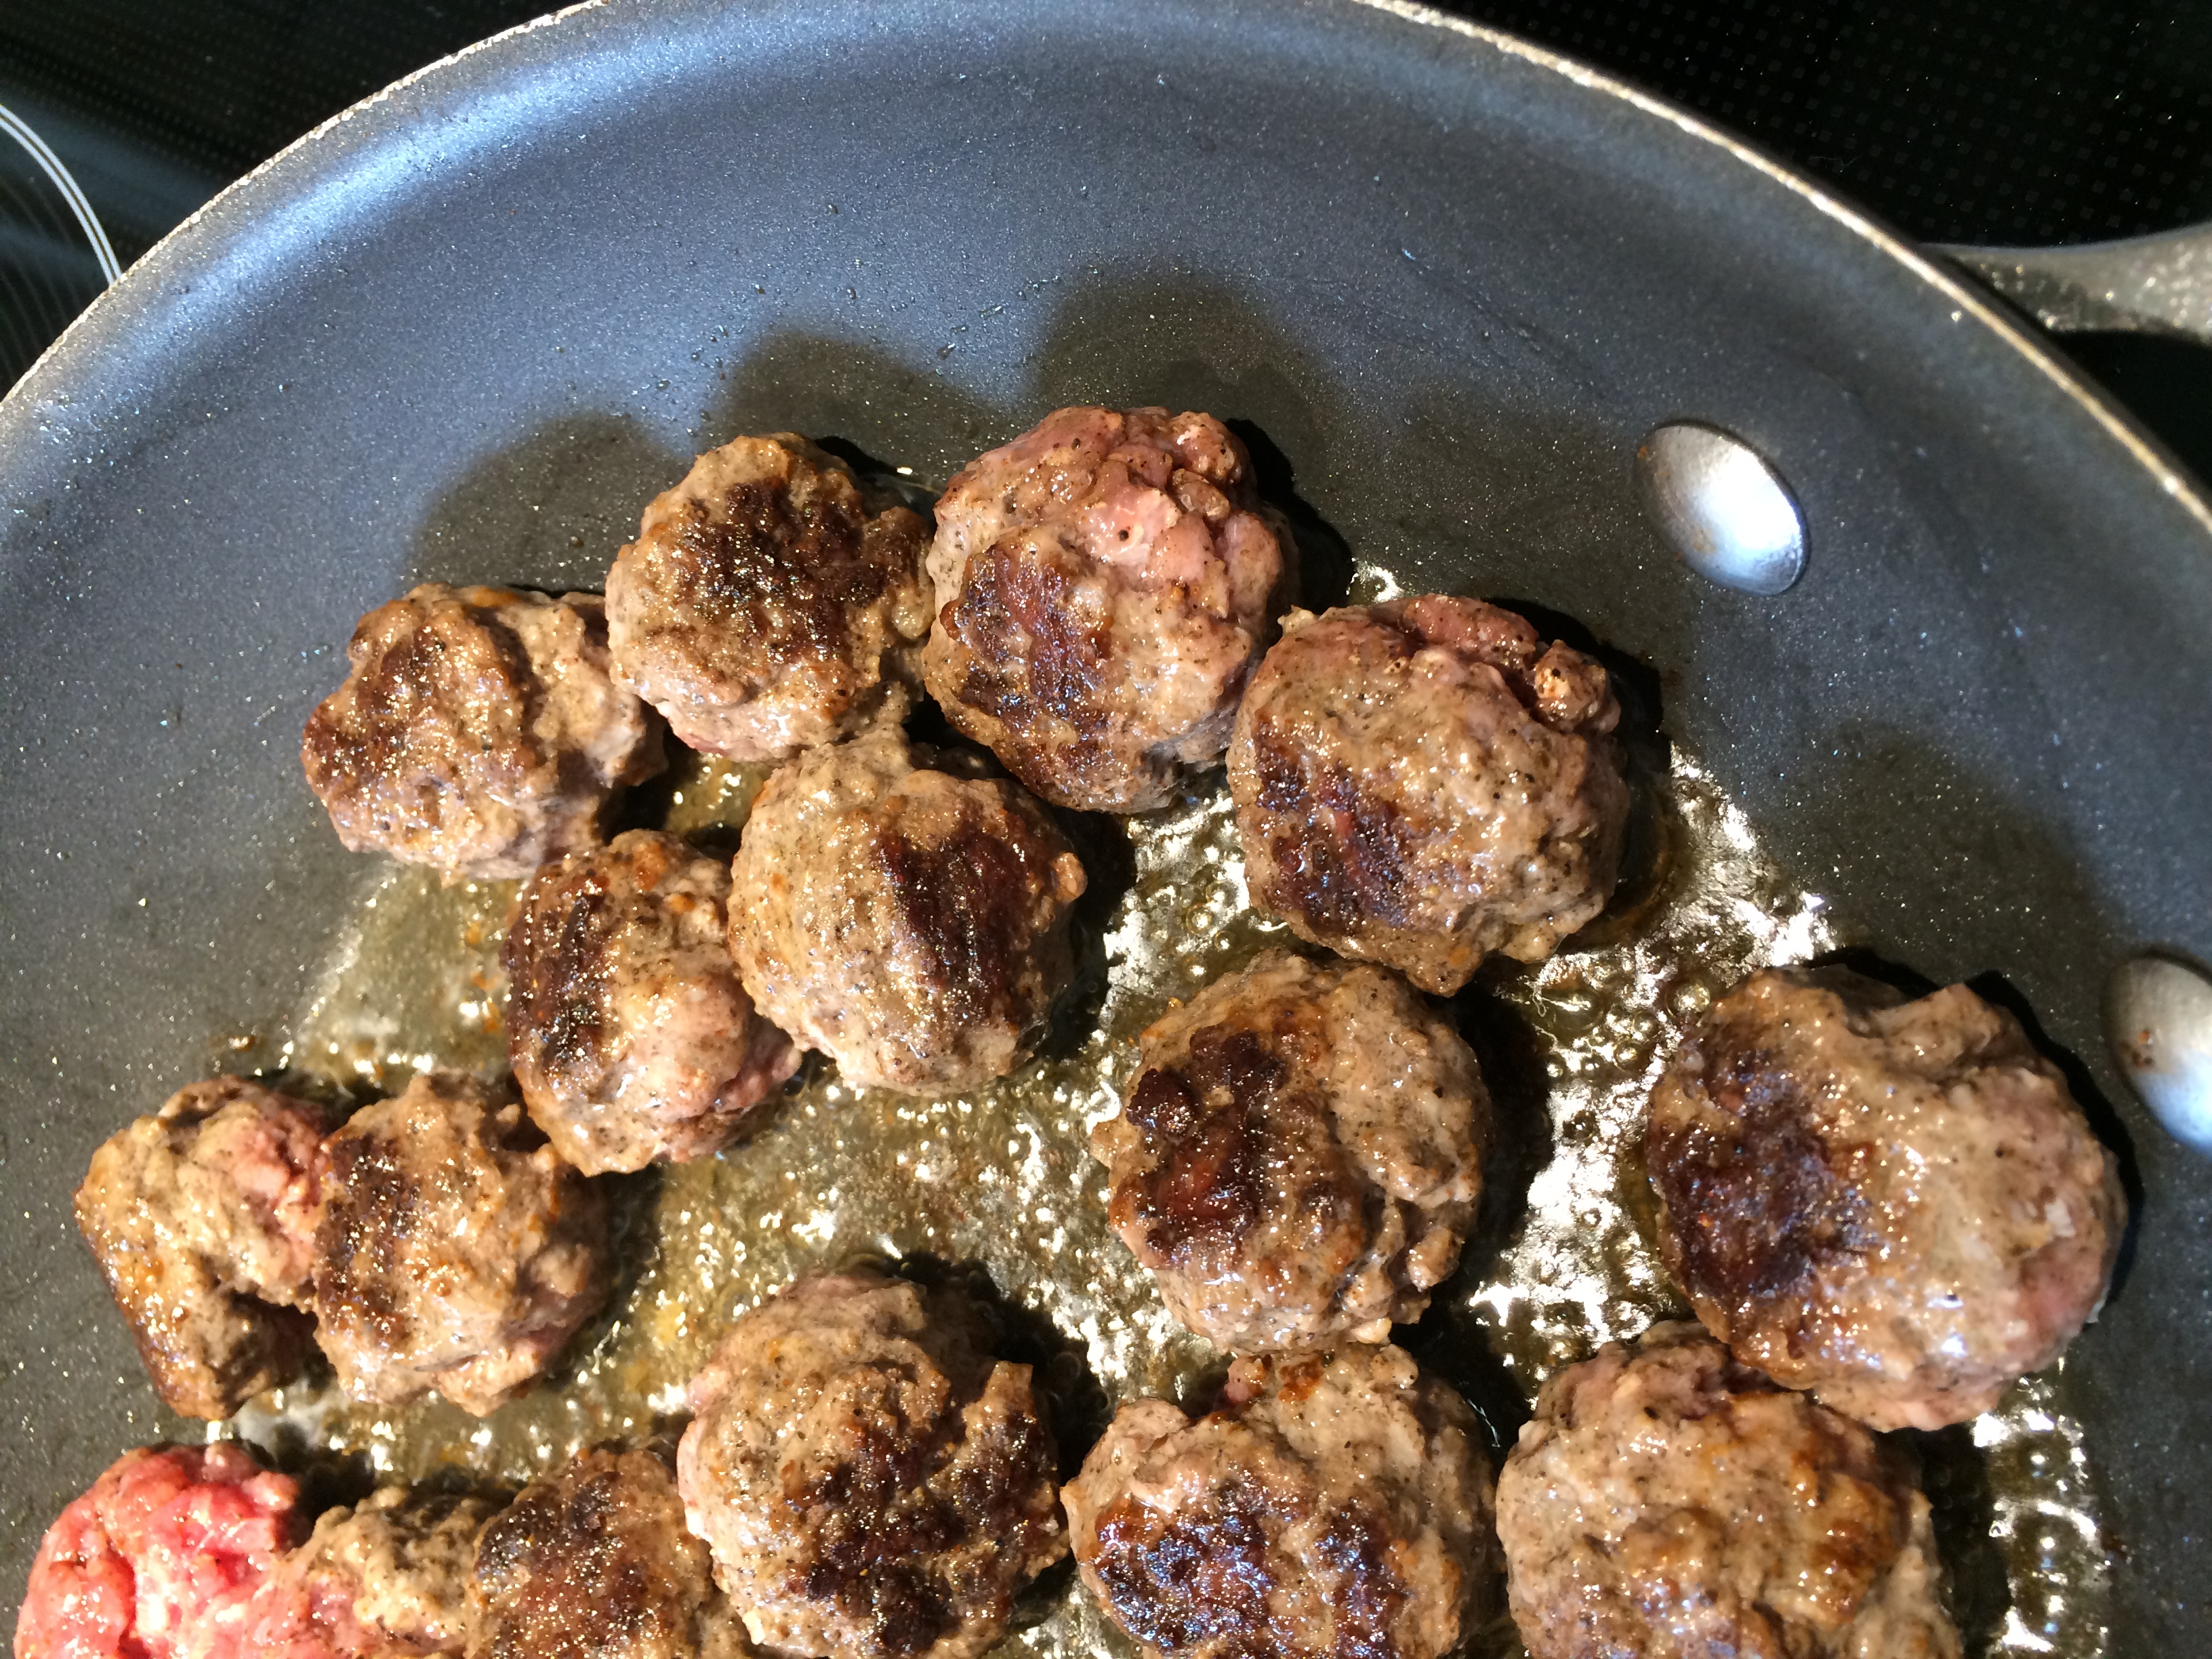 Meatballs, seared and cooking in a sauce pan.